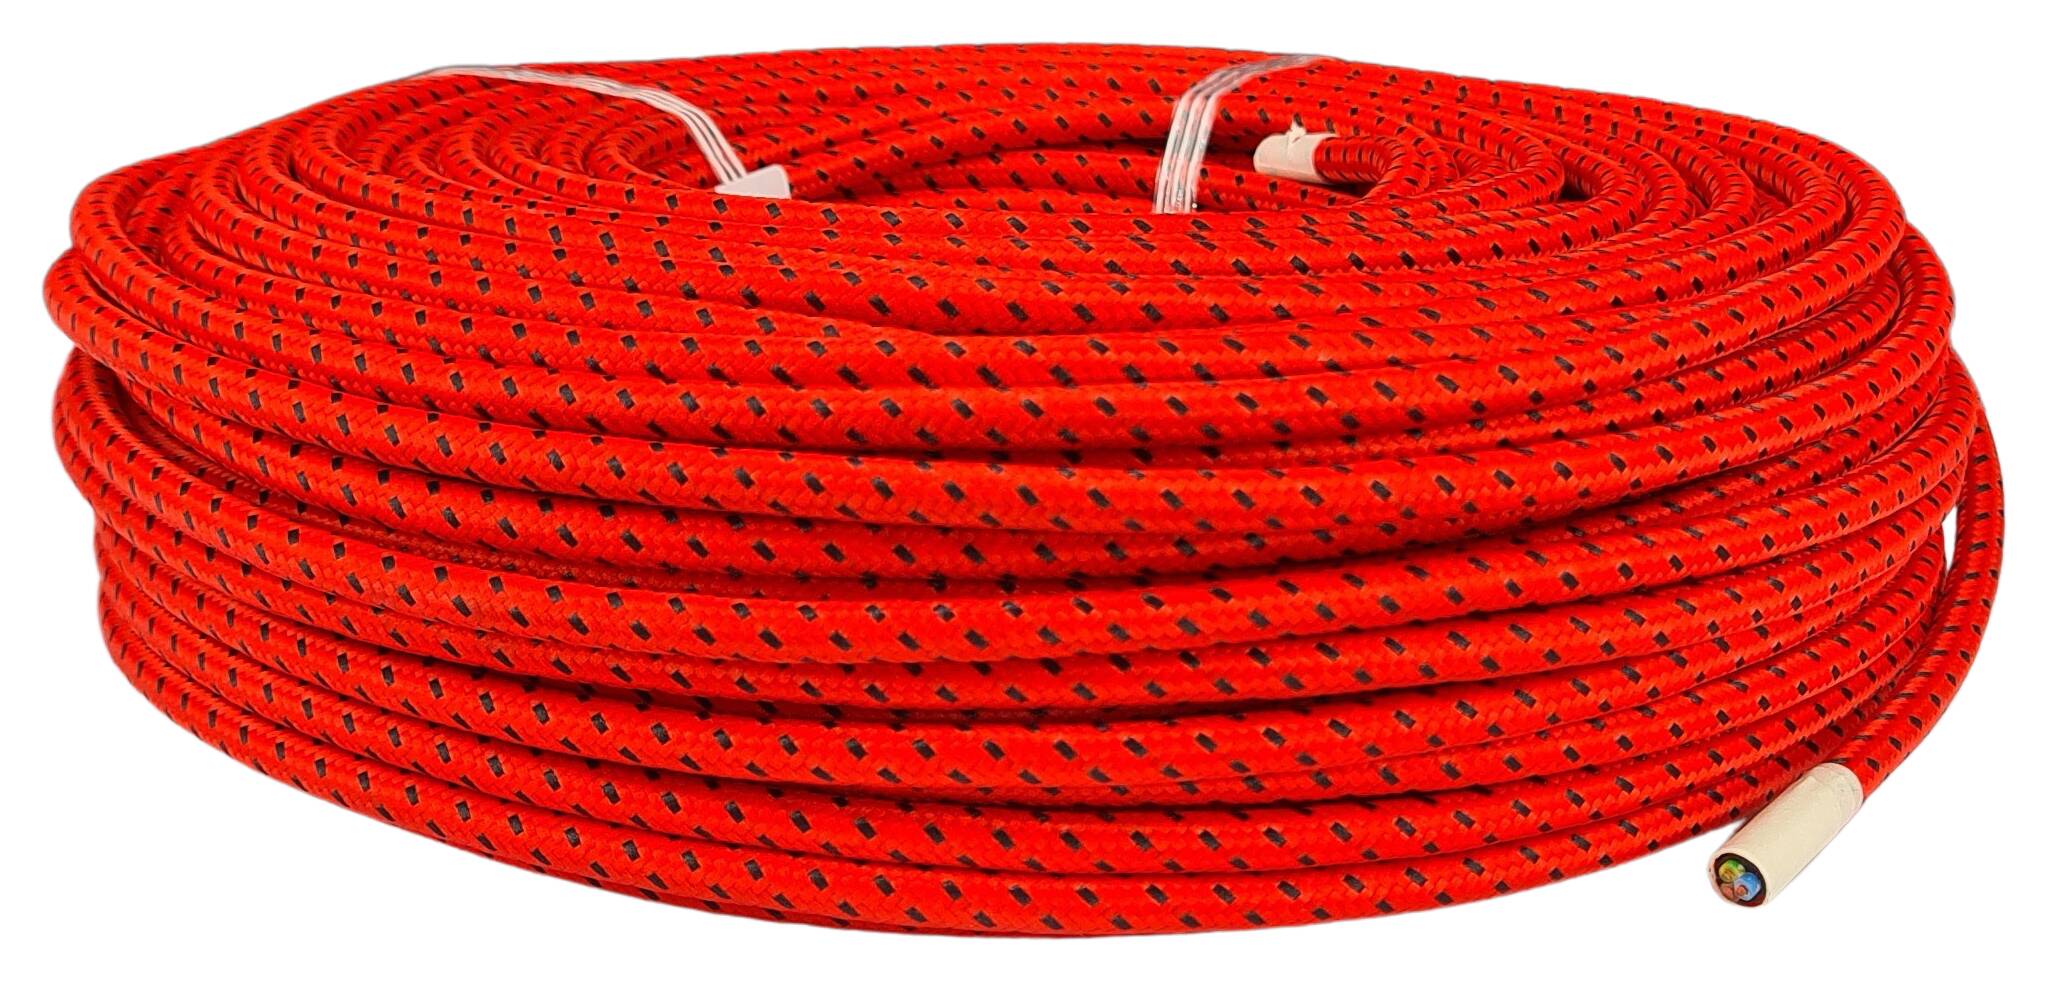 cable 3G 0,75 H03VV-F textile braided RAL 3028 red-black (dotted)